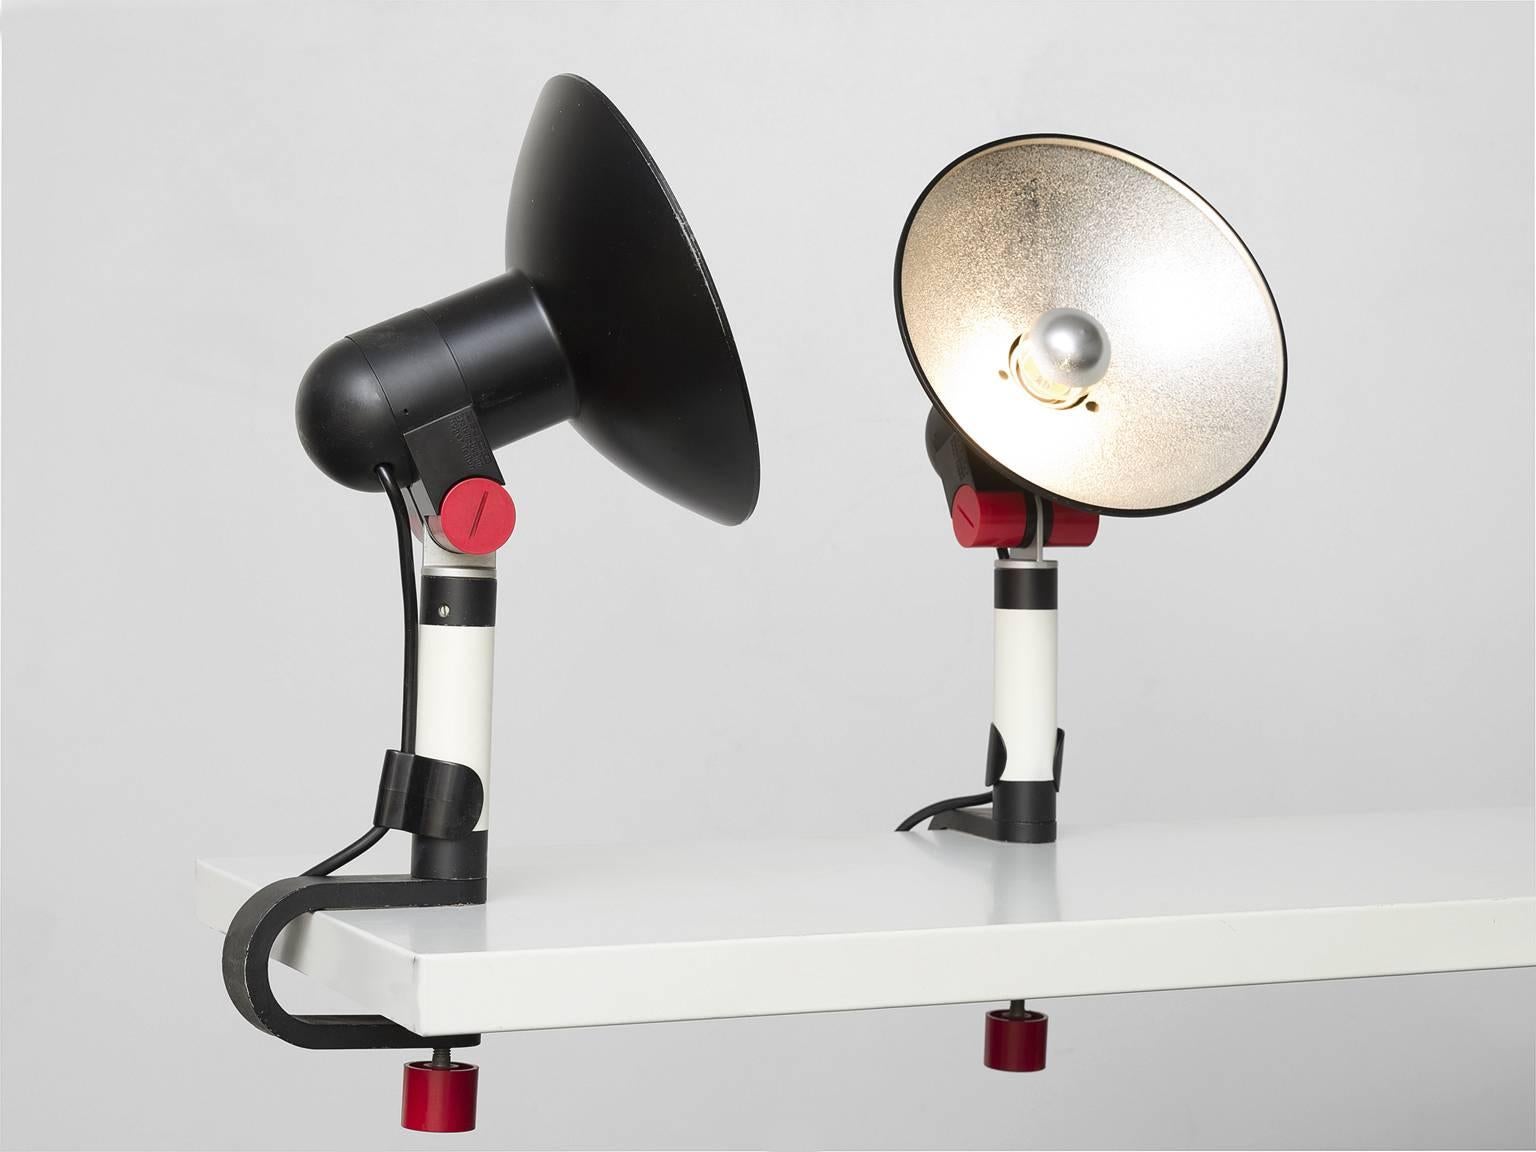 Table lamps, 'Spot' designed by Roger Tallon for Erco, black iron cast, grey lacquered metal, metal, fitting in black and red ABS plastic, France, 1972.

These table lamps are iconic lamps by the French designer Roger Tallon. The black and white